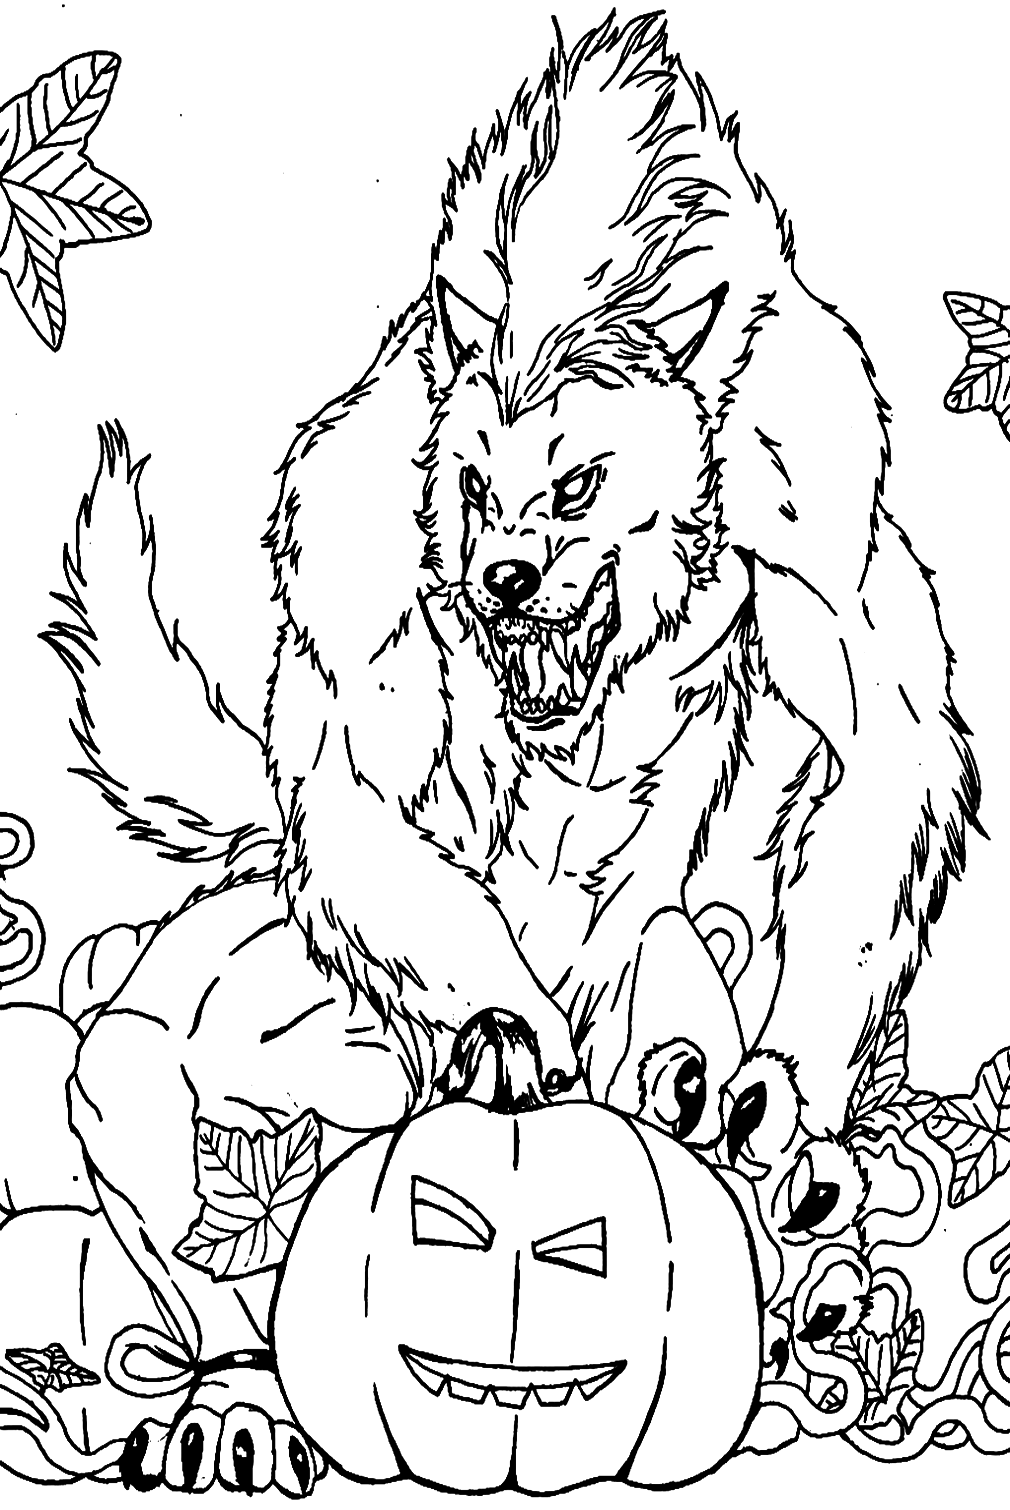 Scary Halloween Werewolf Coloring Pages